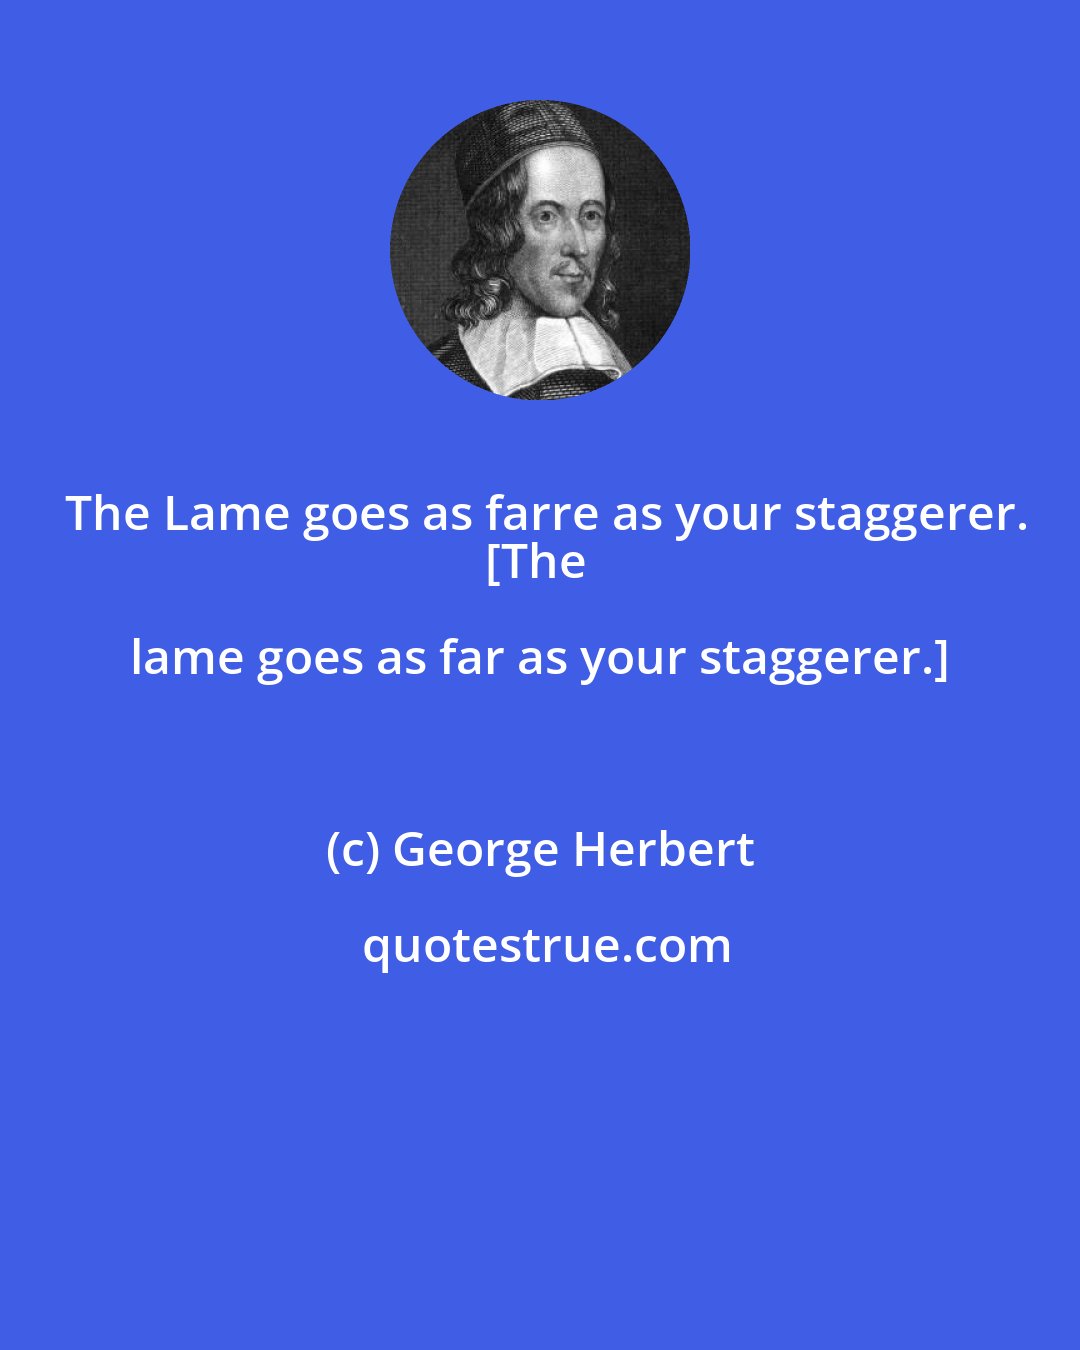 George Herbert: The Lame goes as farre as your staggerer.
[The lame goes as far as your staggerer.]